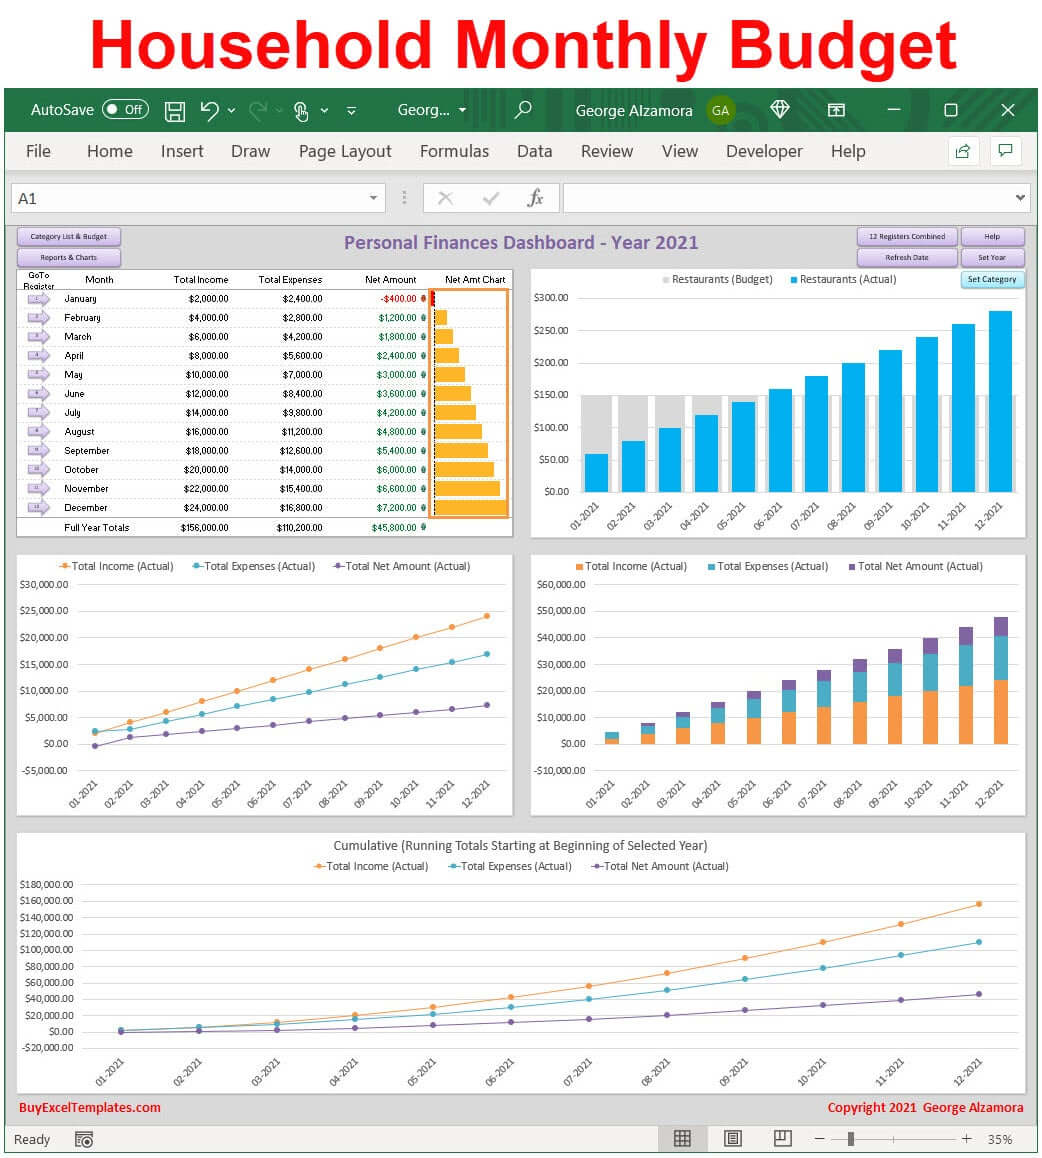 Simple household monthly budget dashboard